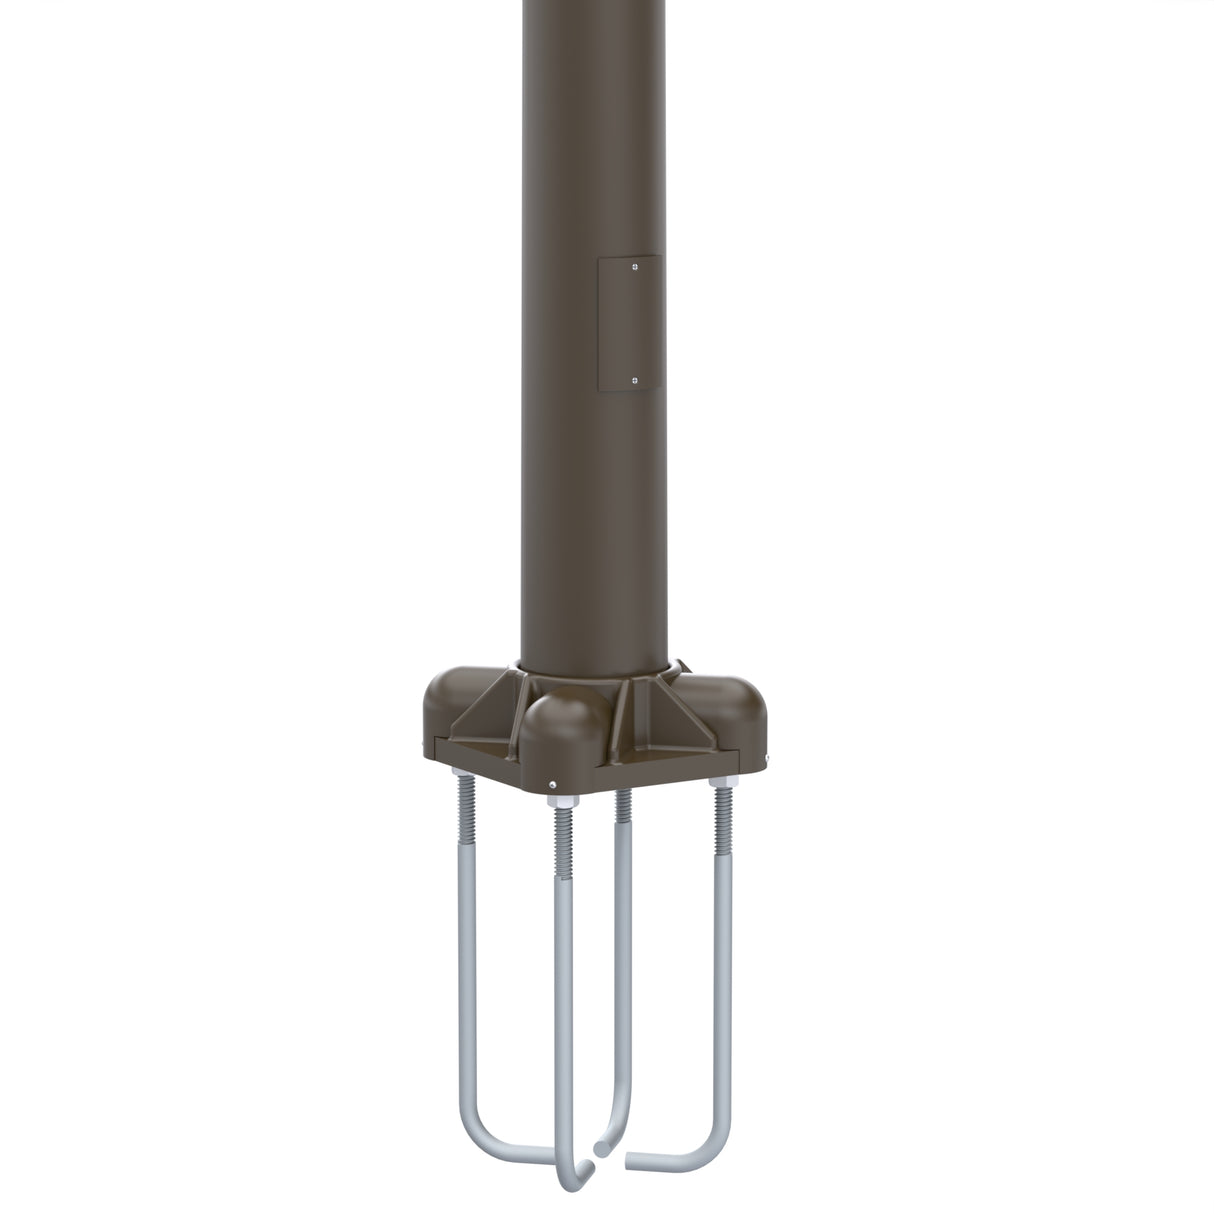 18' Tall x 5.0" Base OD x 3.0" Top OD x 0.156" Thick, Round Tapered Aluminum, Anchor Base Light Pole